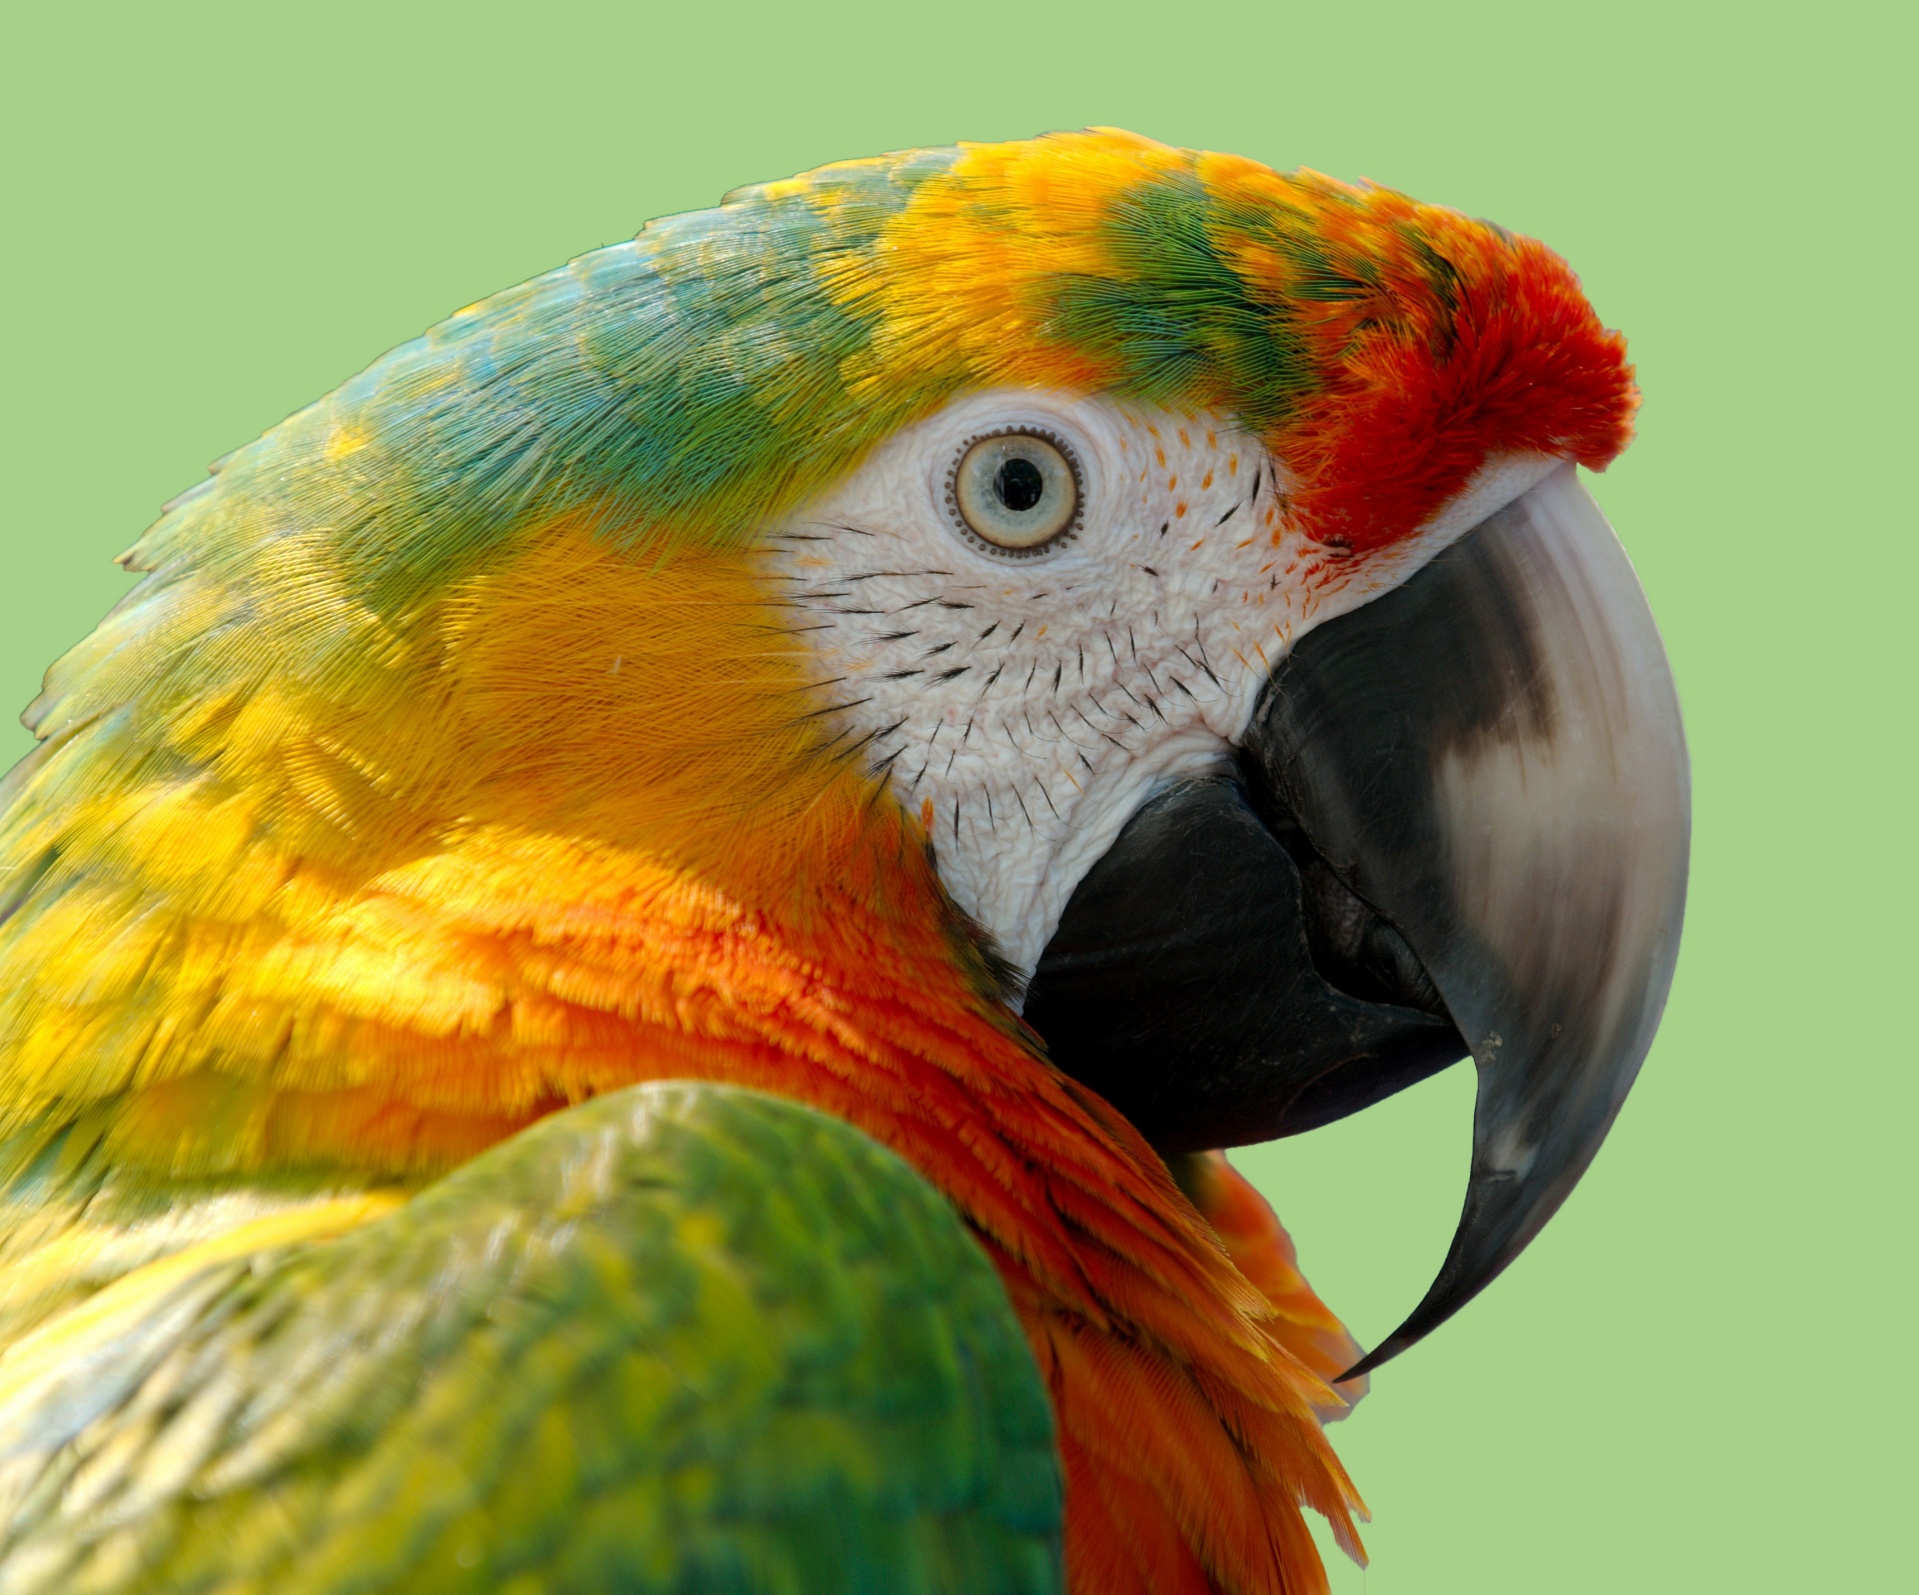 Parrot, macaw portrait in close up details portrait with green background